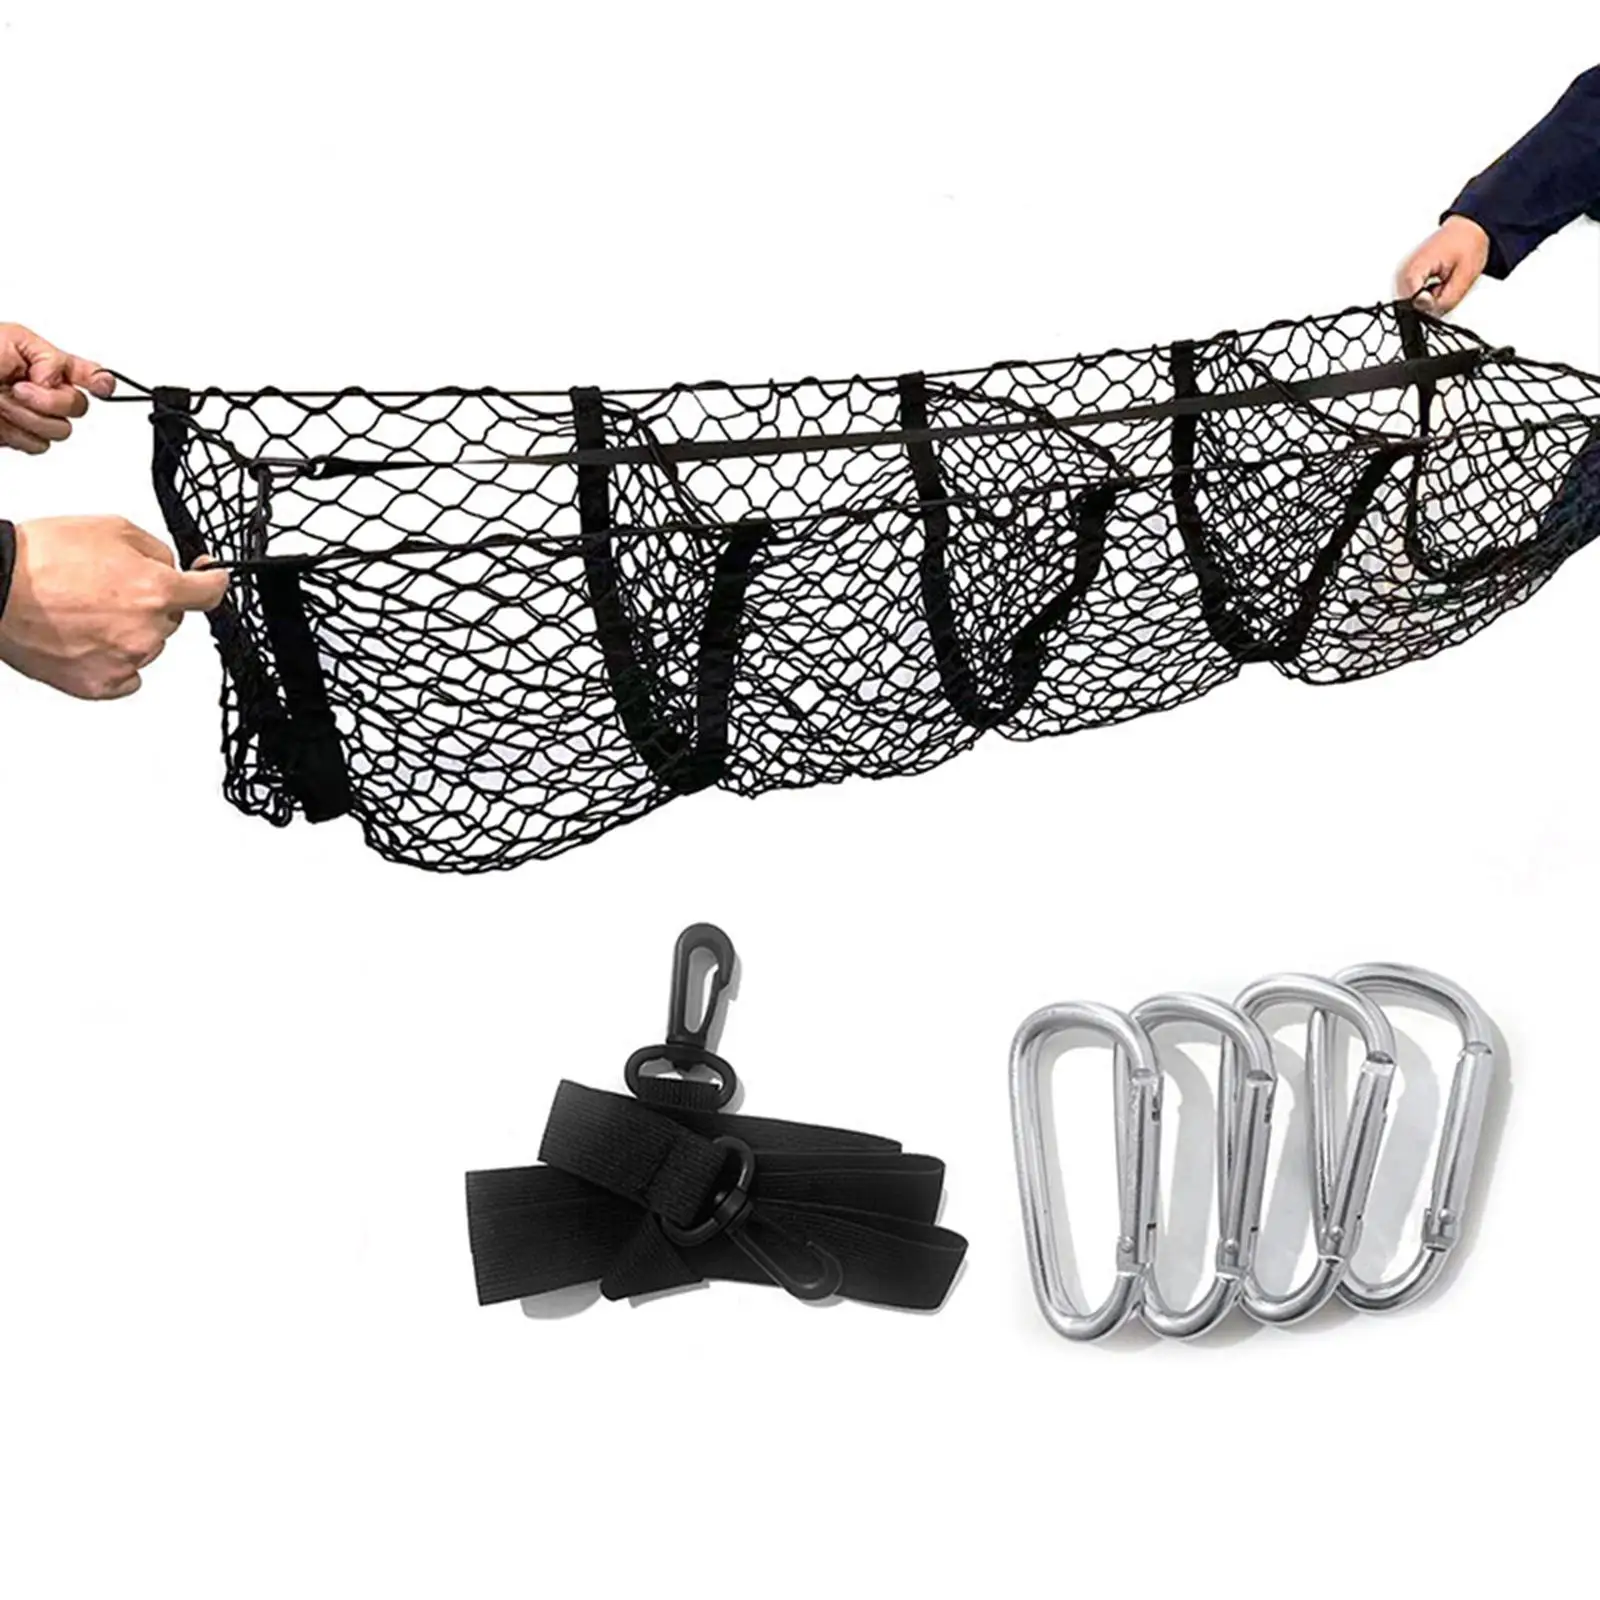 net bag Accessories elastic Stretchable with 4 Hook Reusable Storage Organizer Holder for SUV Trucks